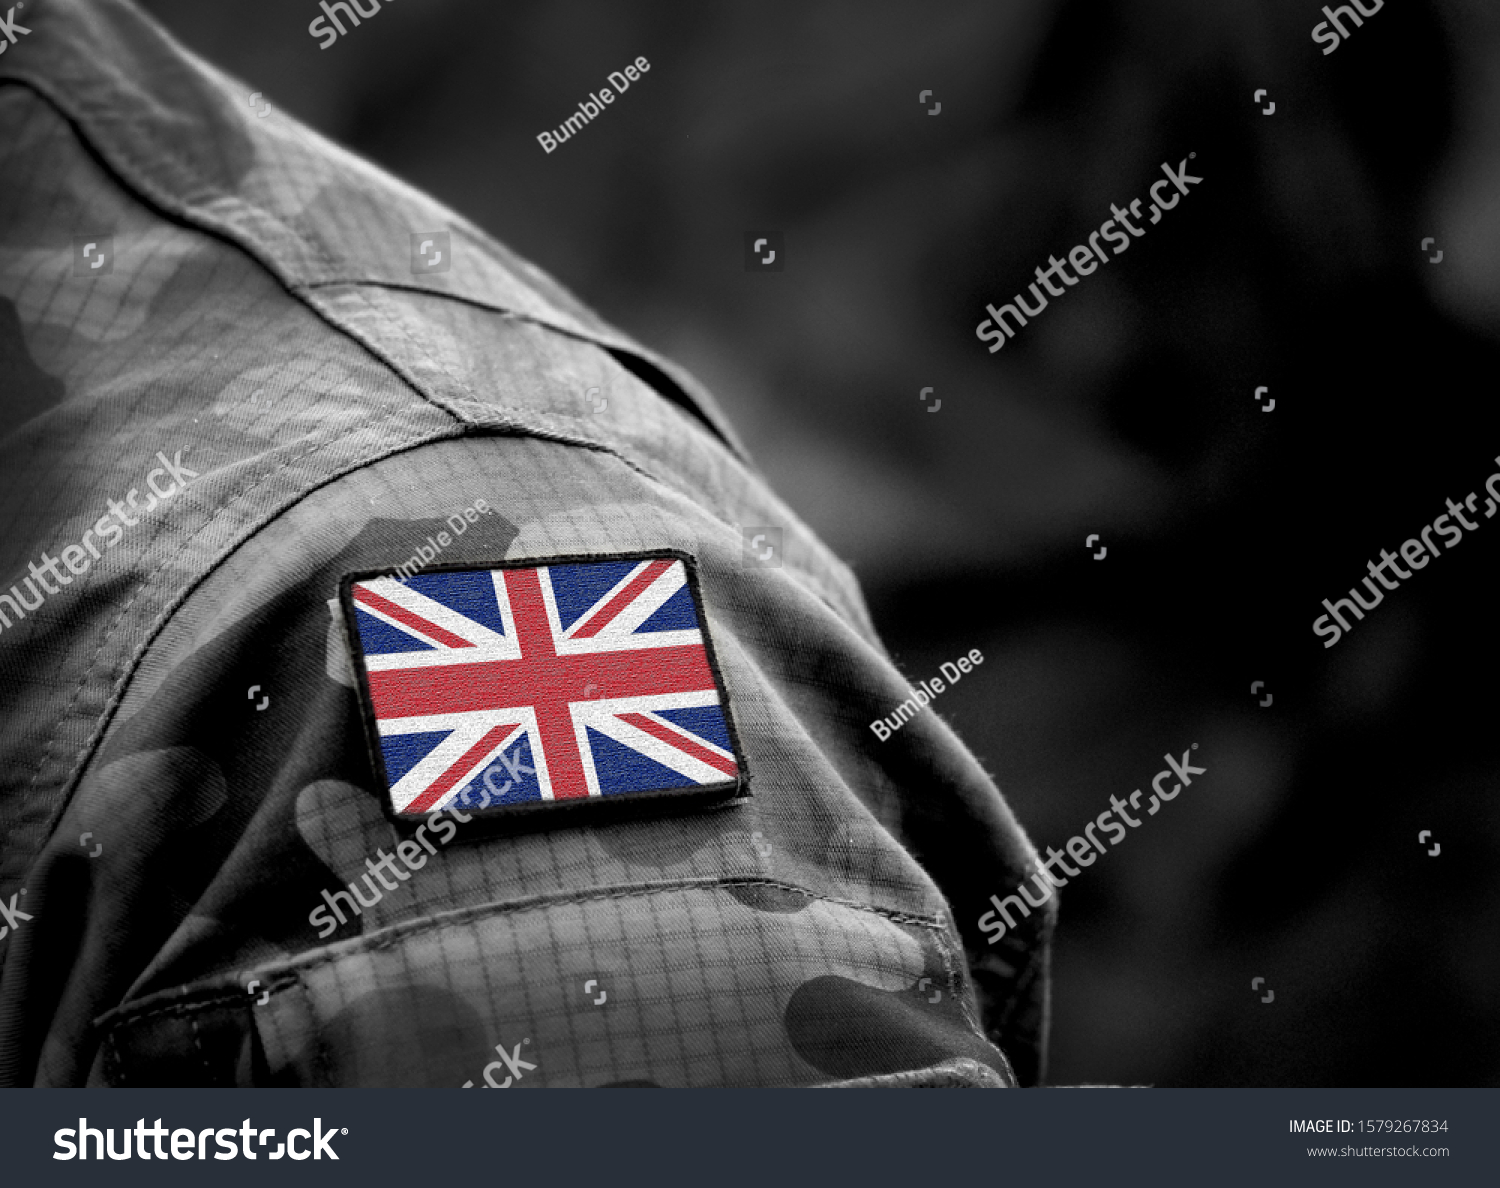 Flag of United Kingdom on military uniform. UK Army. British Armed Forces, soldiers. Collage. #1579267834